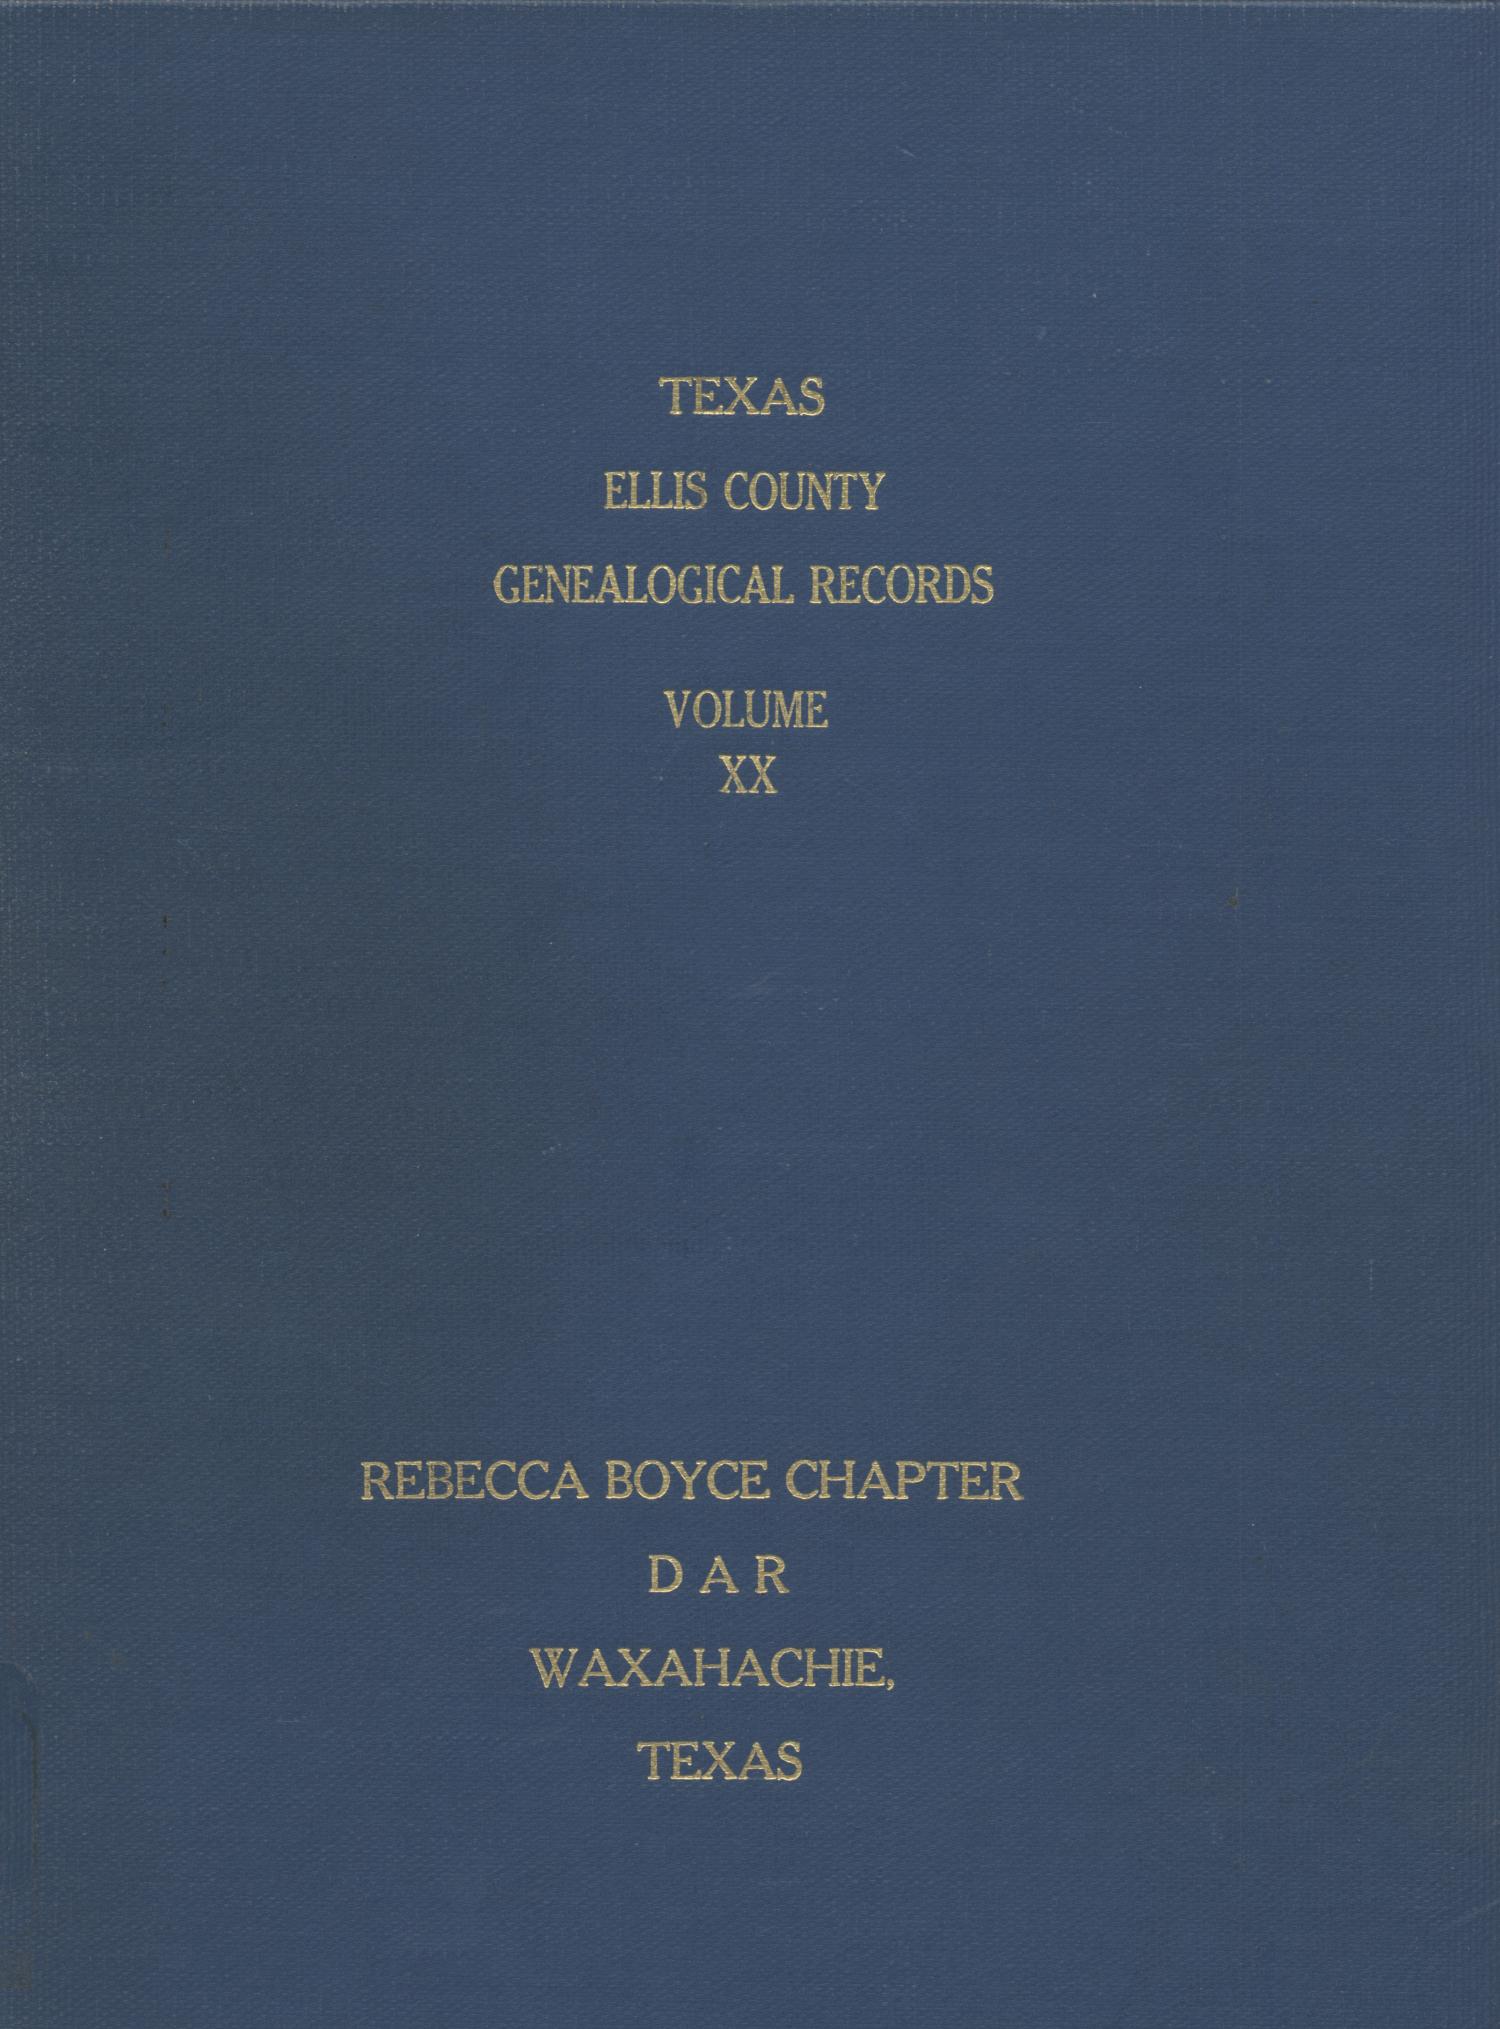 Texas Genealogical Records, Ellis County, Volume 20, 1720-1967
                                                
                                                    Front Cover
                                                